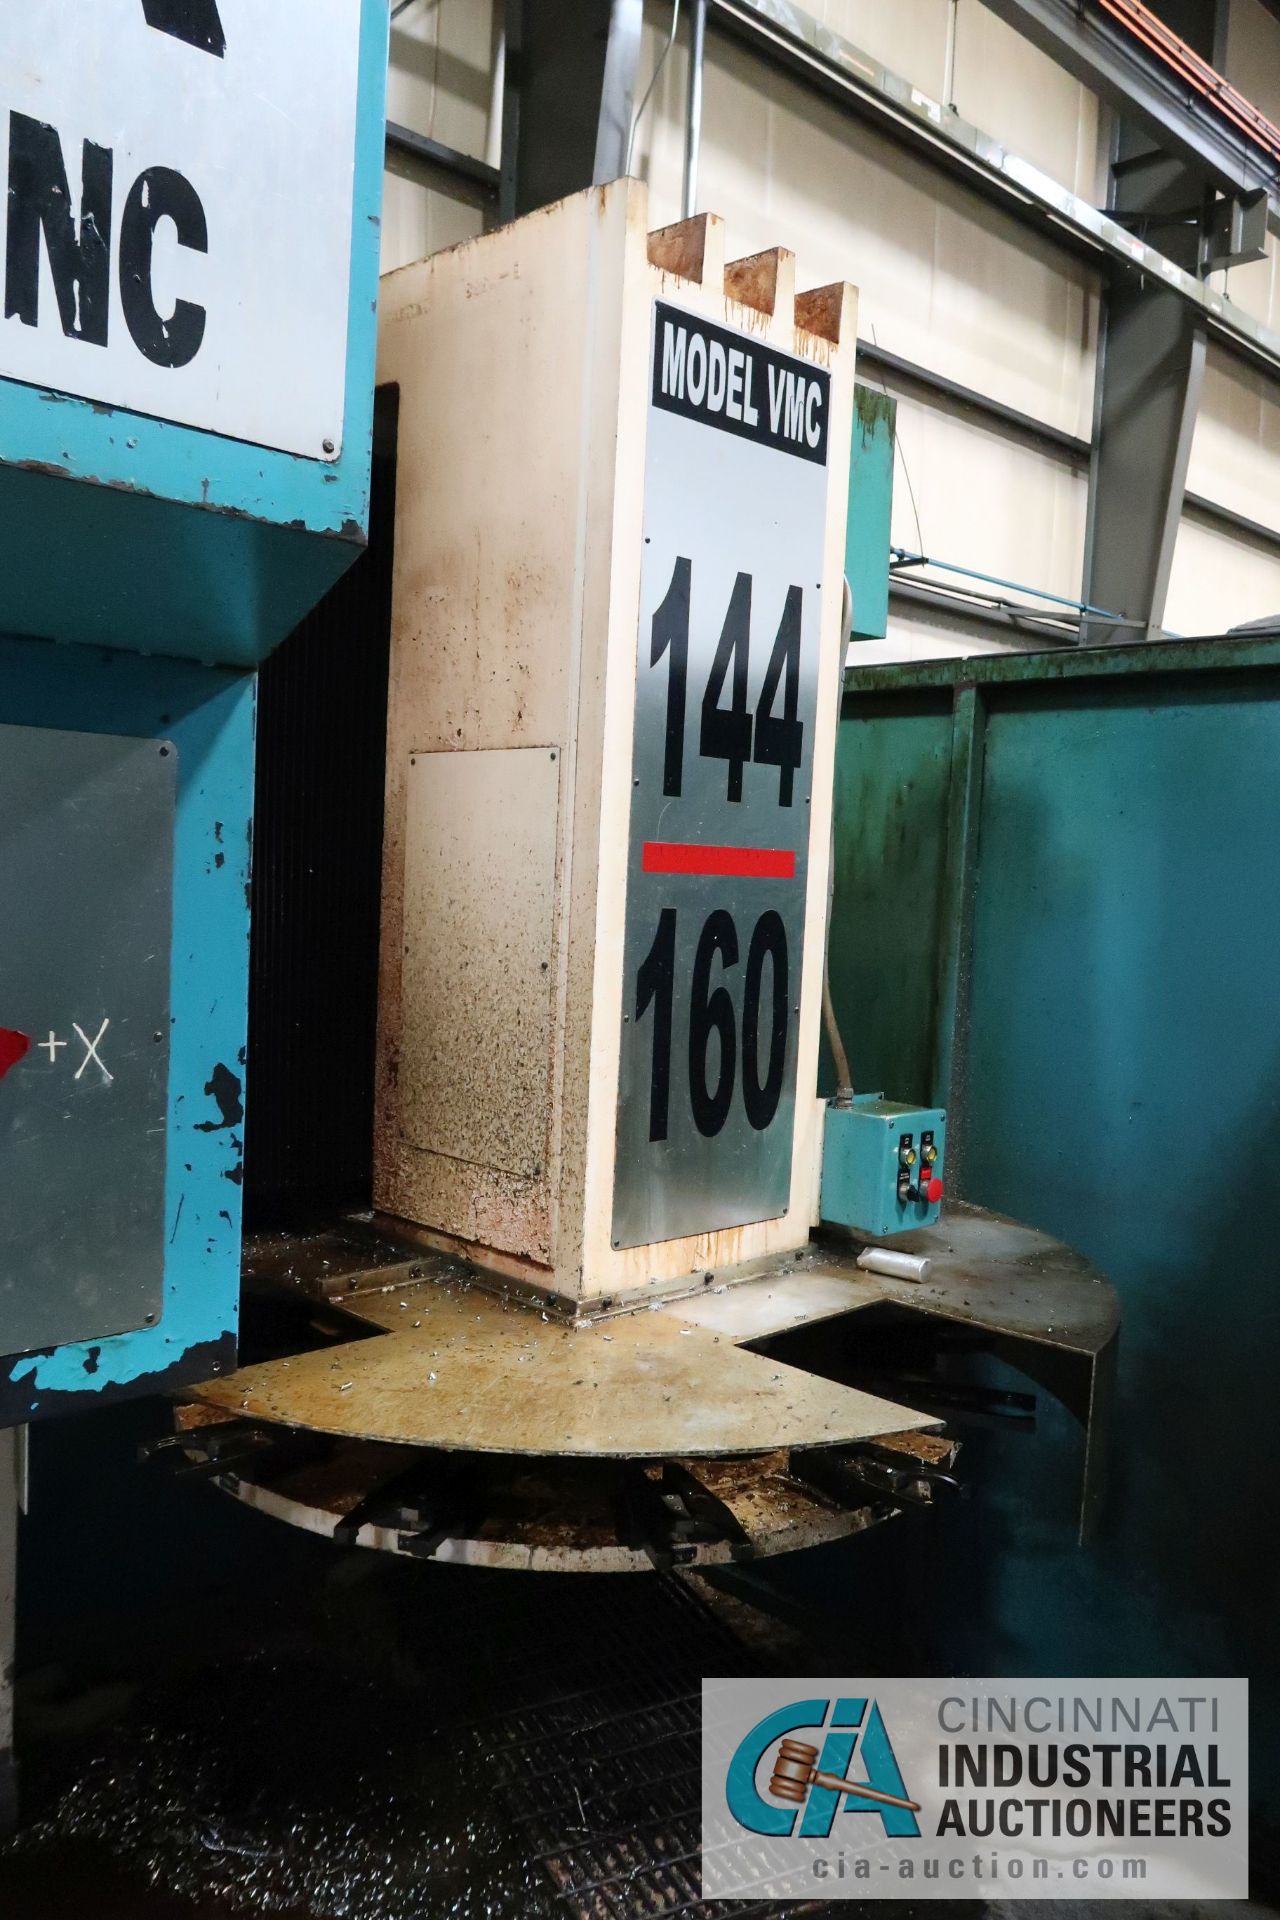 144" / 160" PHOENIX MODEL VMC 144/160 CNC VERTICAL TURNING CENTER WITH LIVE TOOING; S/N M-1562, - Image 6 of 24